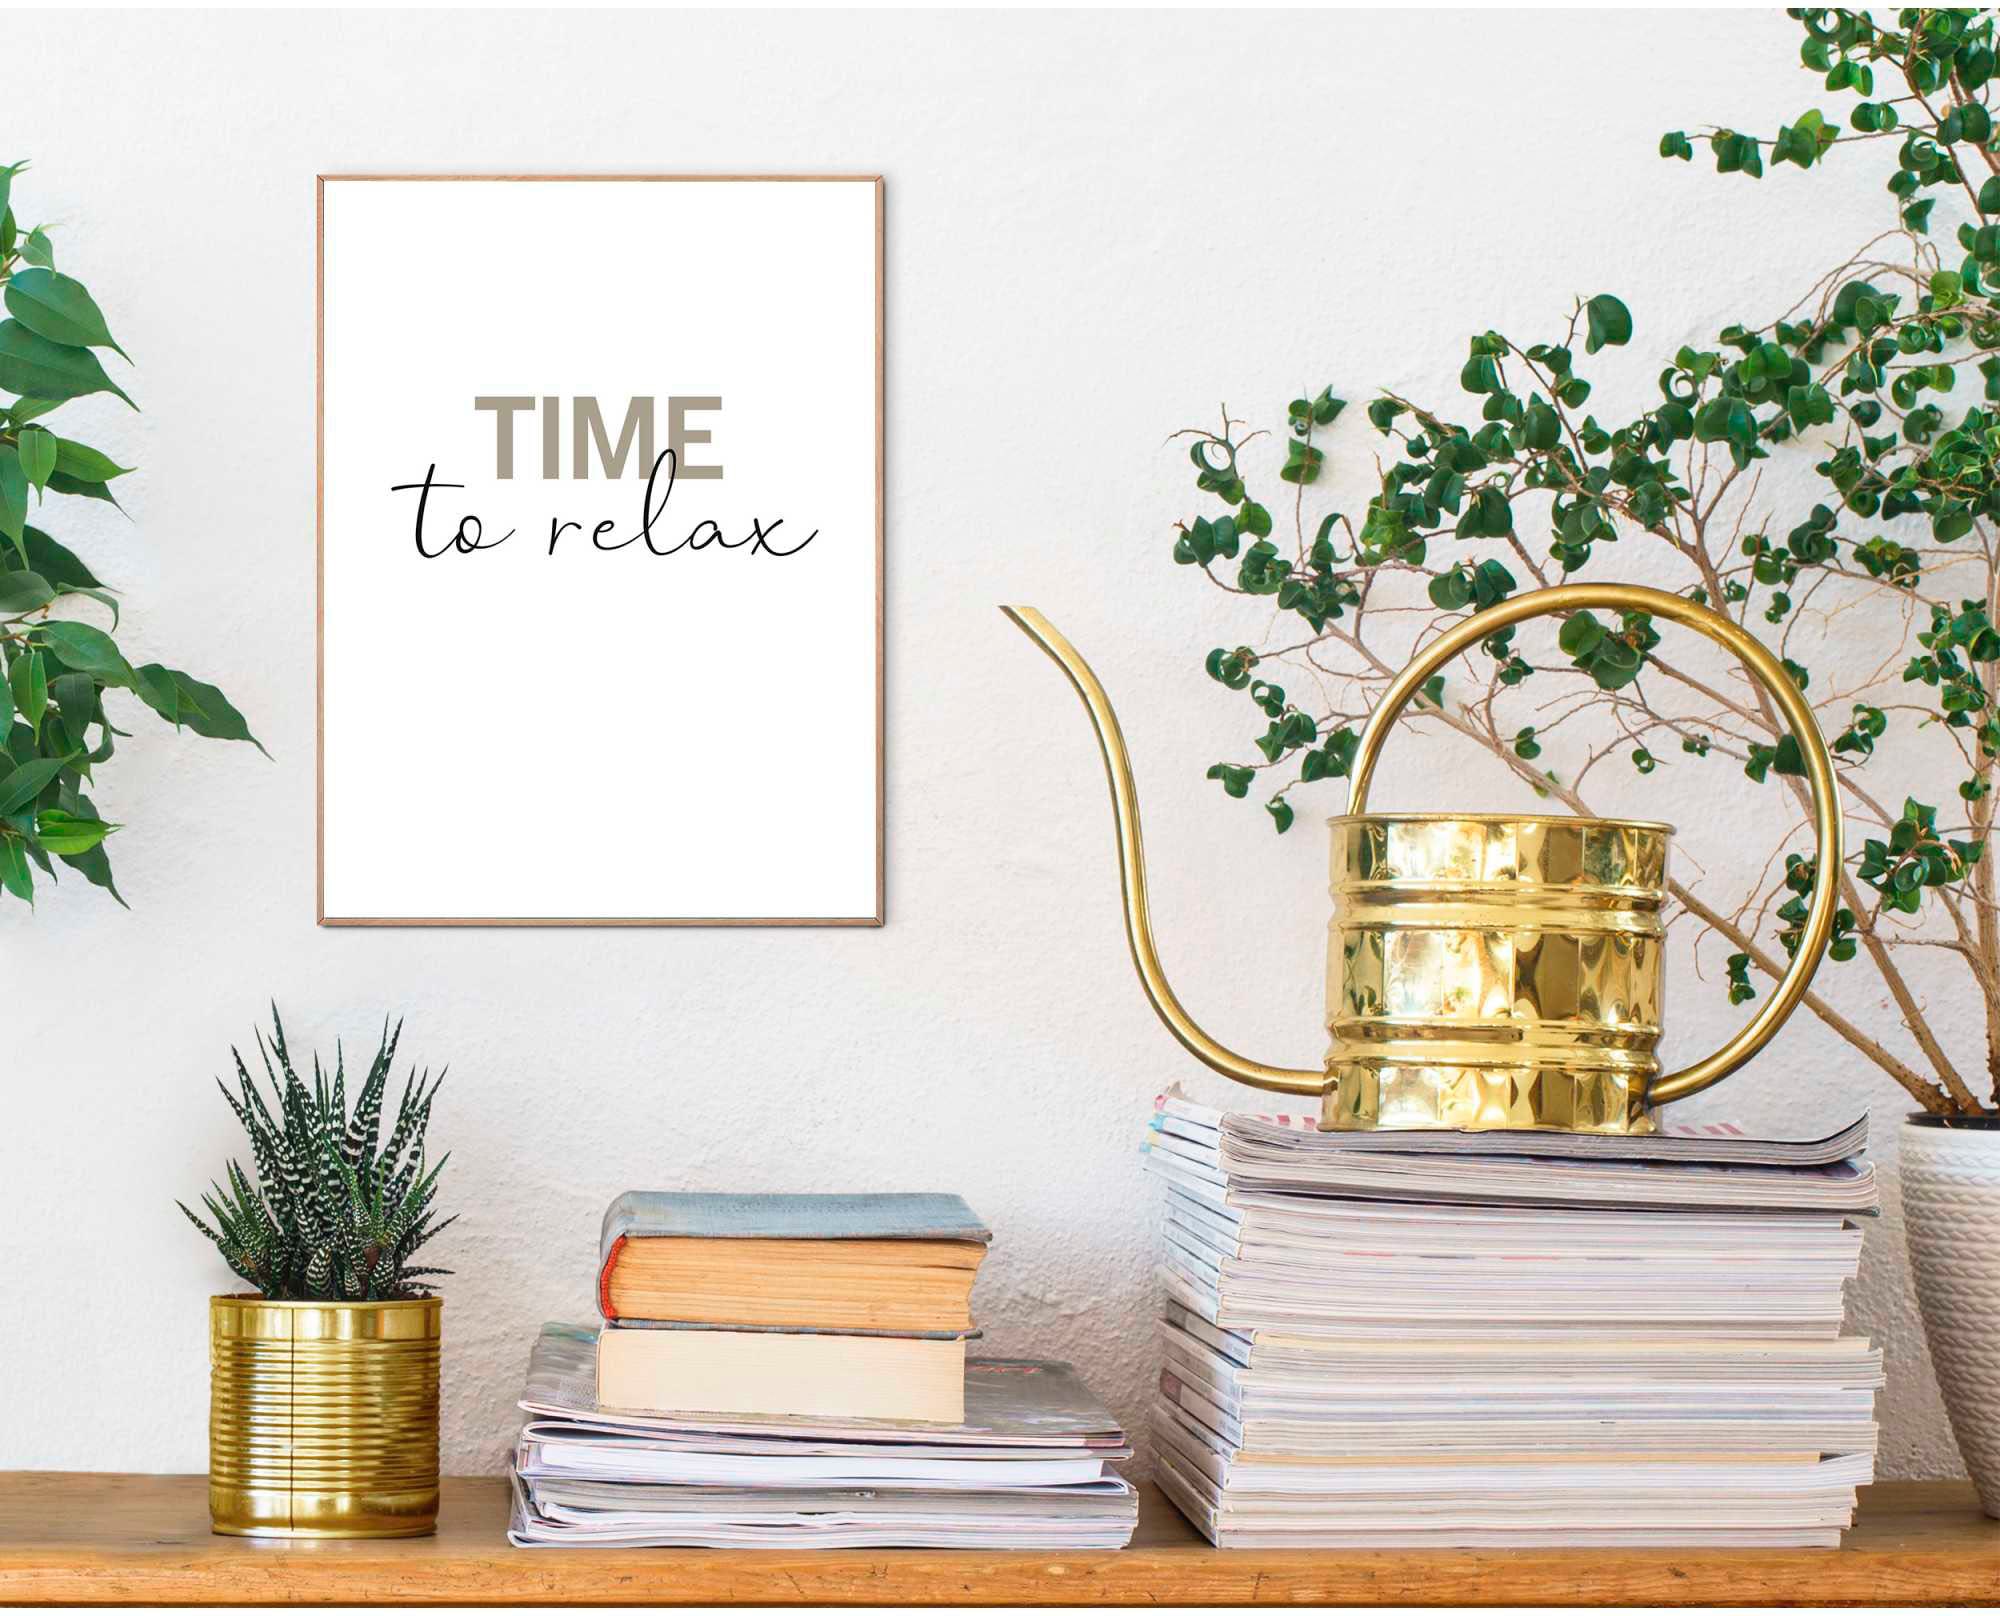 relax« Reinders! OTTO Poster kaufen to »Time bei